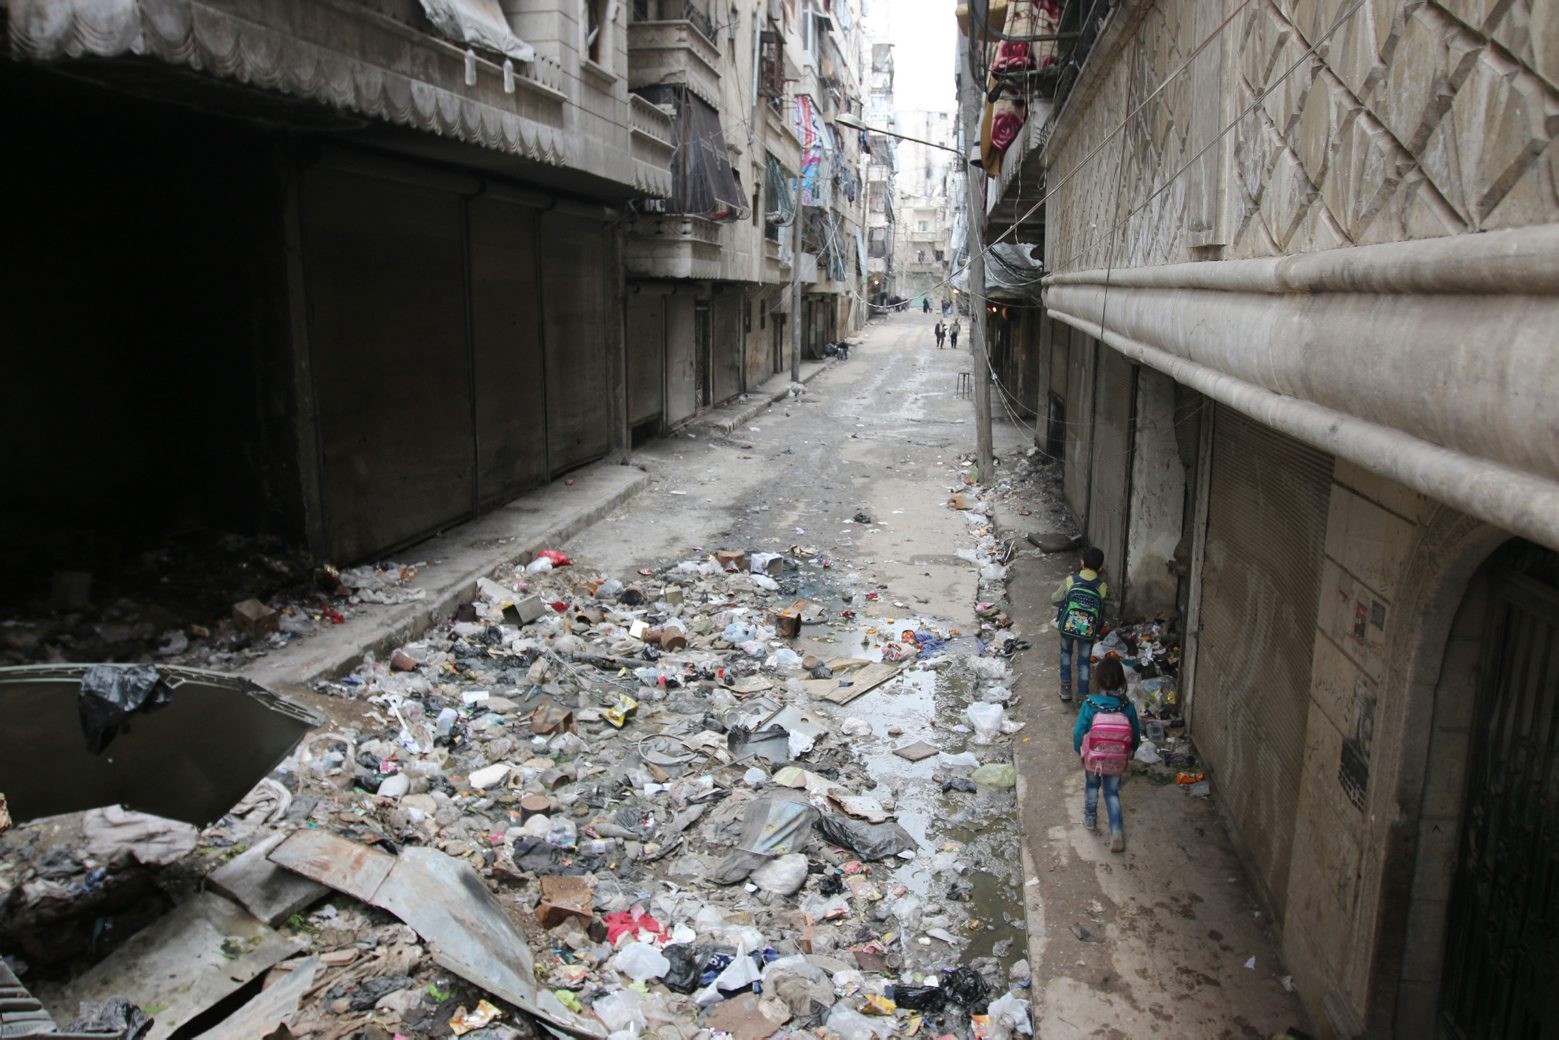 In this Thursday, Feb. 11, 2016 photo, children walk down a street in Aleppo, Syria. The fighting around Syria's largest city of Aleppo has brought government forces closer to the Turkish border than at any point in recent years, routing rebels from key areas and creating a humanitarian disaster as tens of thousands of people flee. (Alexander Kots/Komsomolskaya Pravda via AP) Mideast Syria